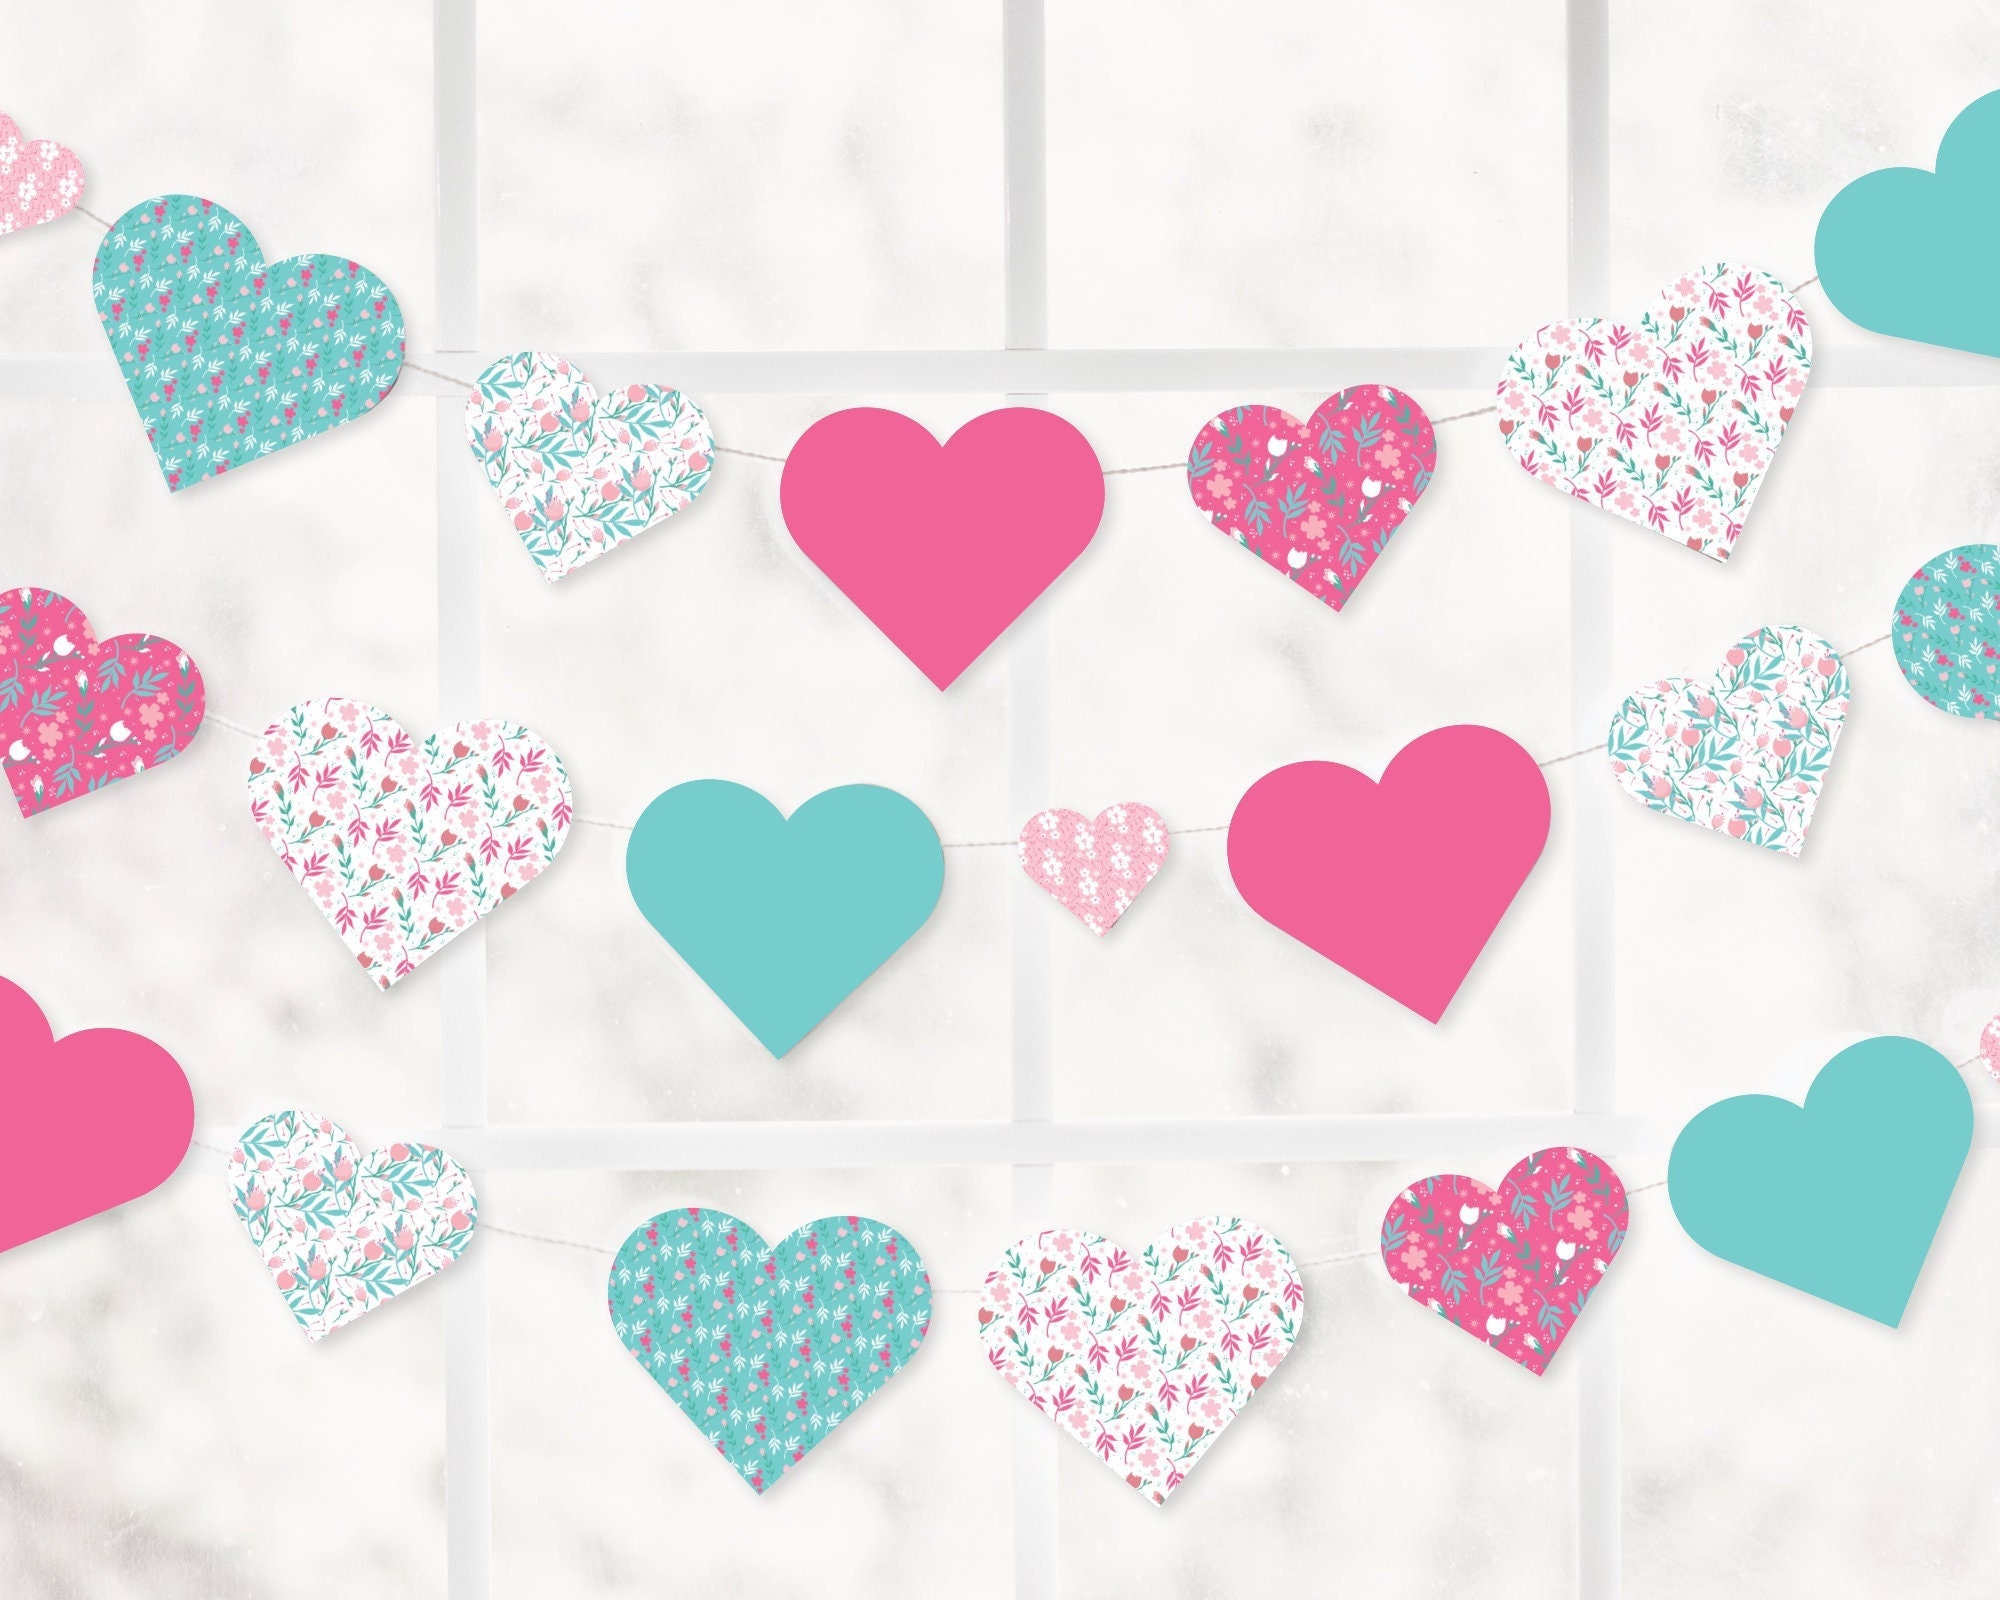 Heart Garlands, Large Scallop Hearts, Floral Hearts, Paper Hearts Garland,  Hearts Embellishments, Valentines Garland, Love Decor 